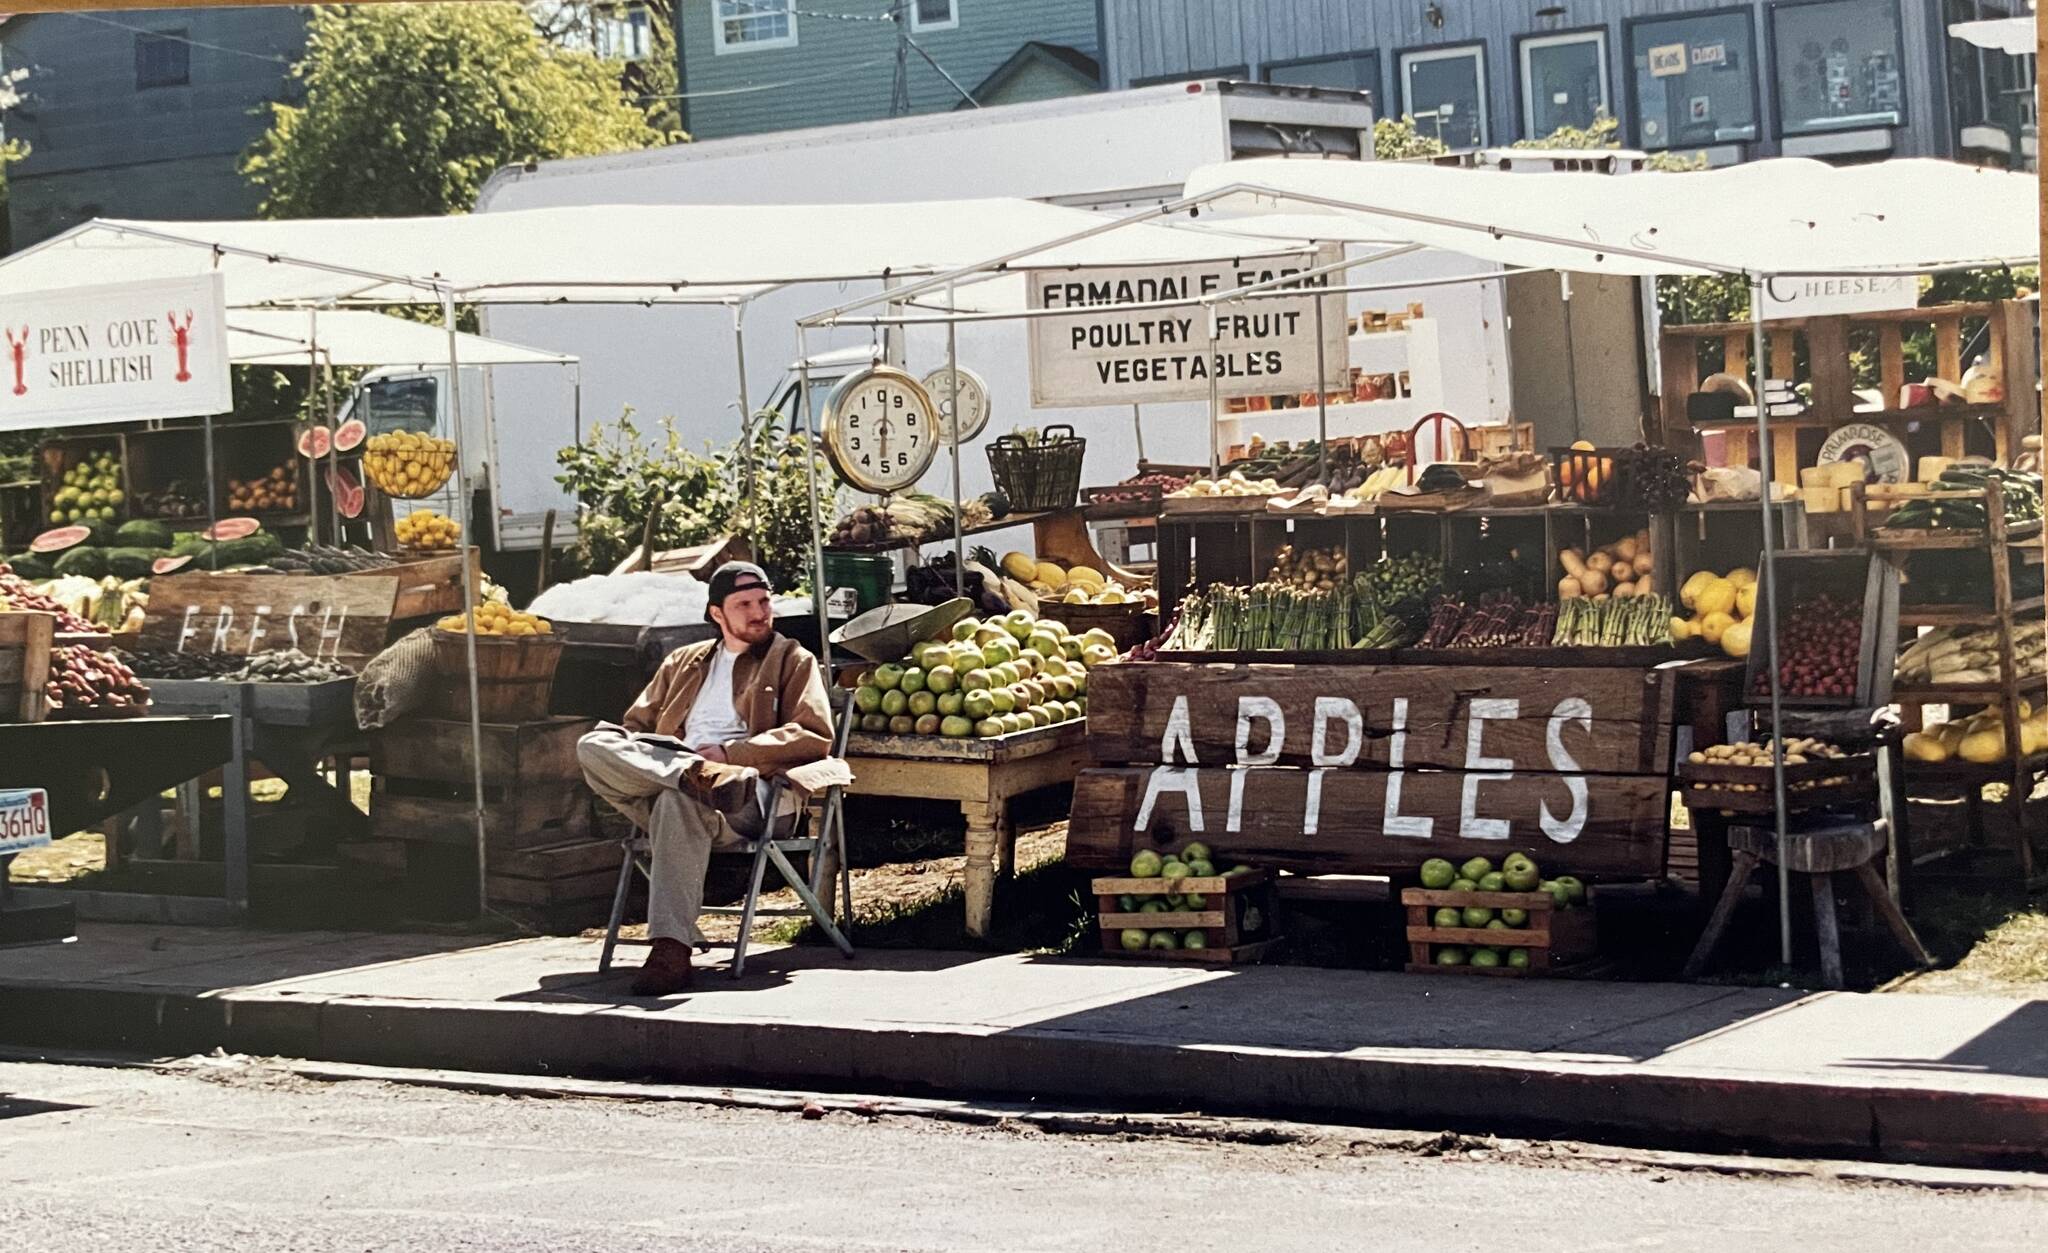 File photo
A Whidbey News-Times reporter on the set of Practical Magic snapped a photo of a farmers market that filmmakers set up on Front Street in Coupeville.